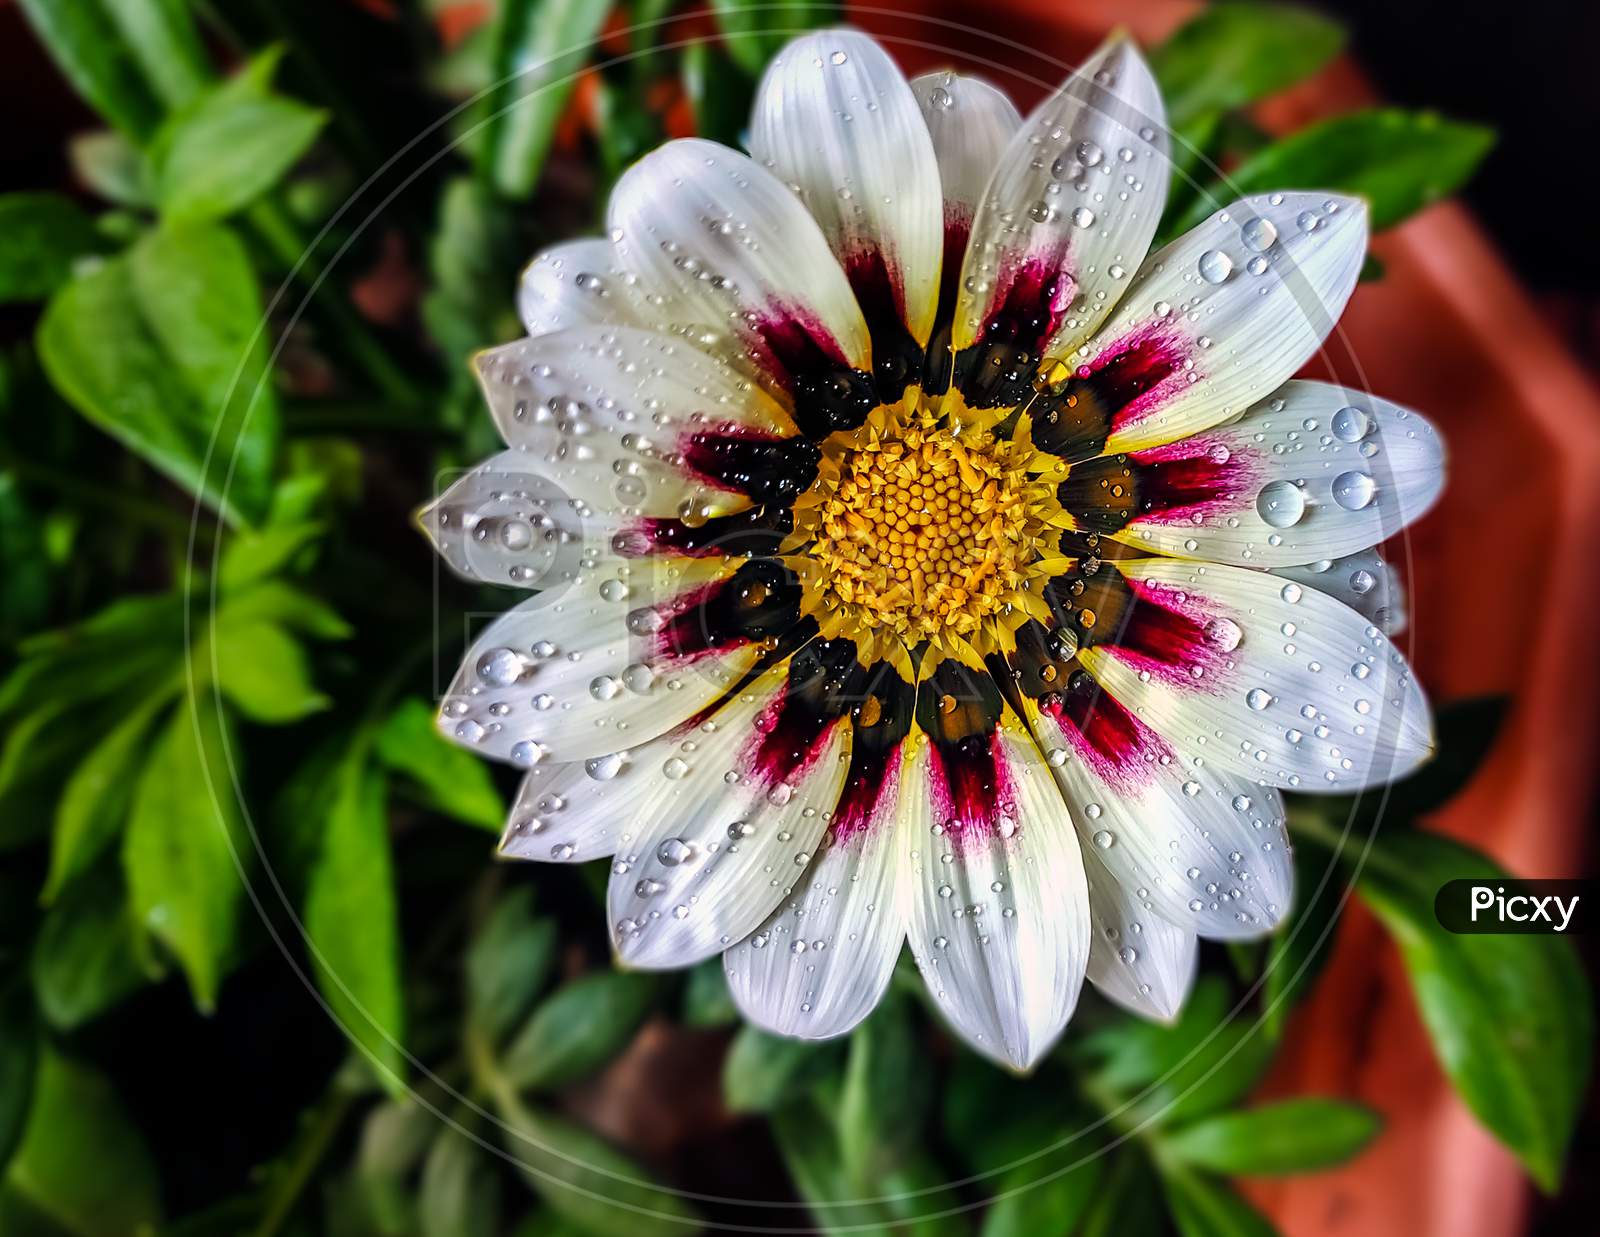 Isolated, Close-Up Image Of White & Pink Petals Of Gazania Flower.